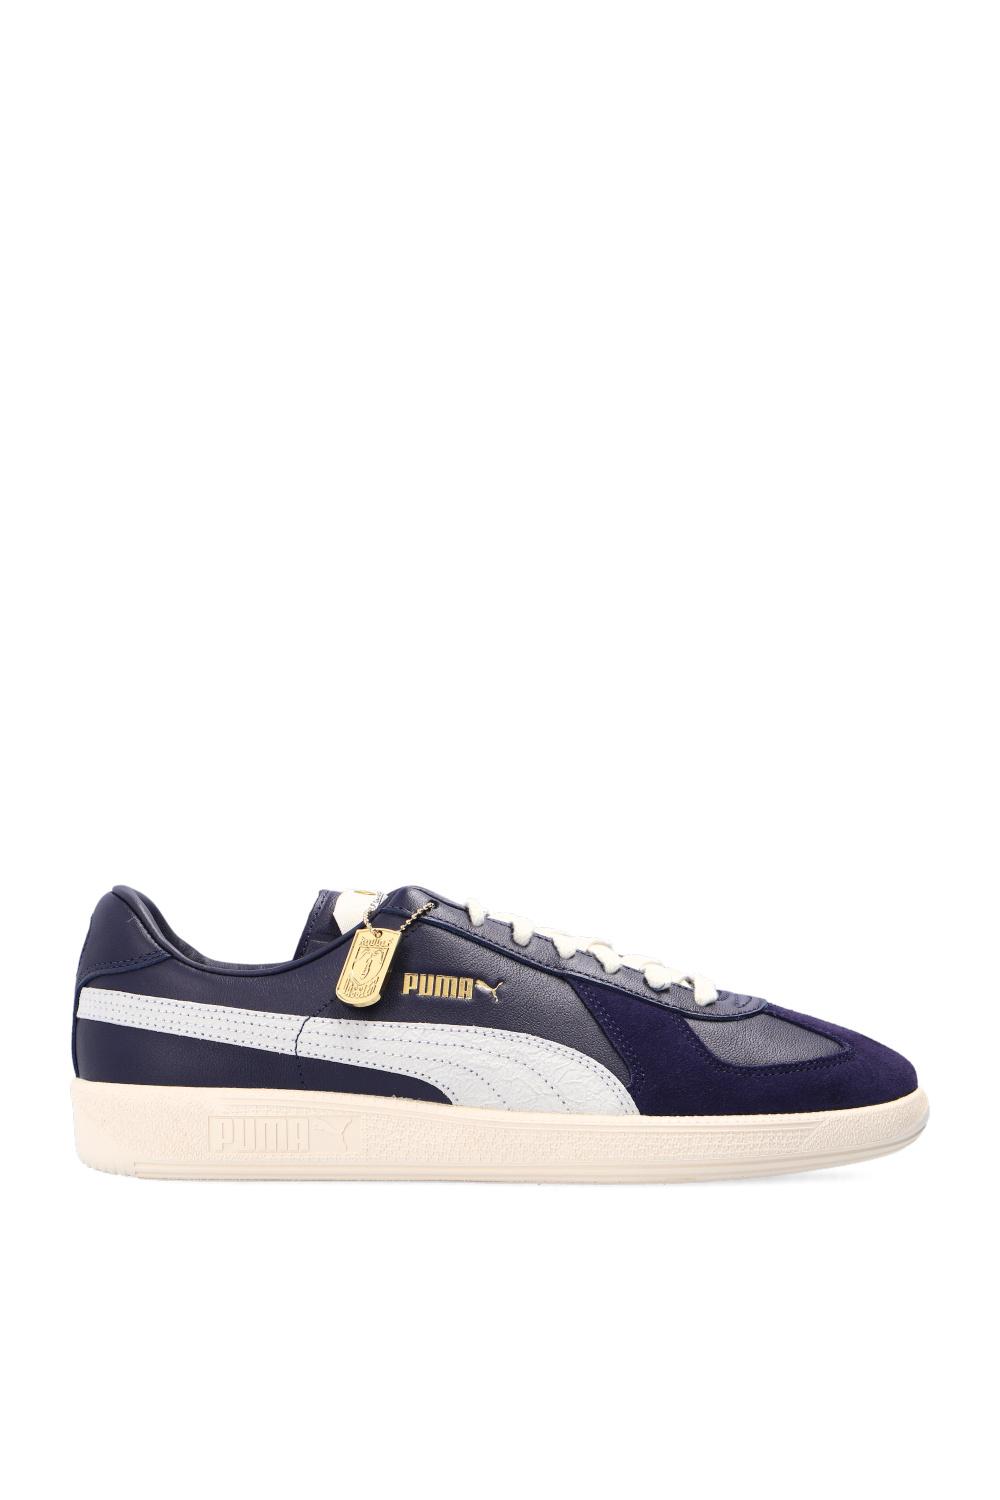 PUMA 'the Rudolf Dassler Legacy' Collection in Blue for Men | Lyst